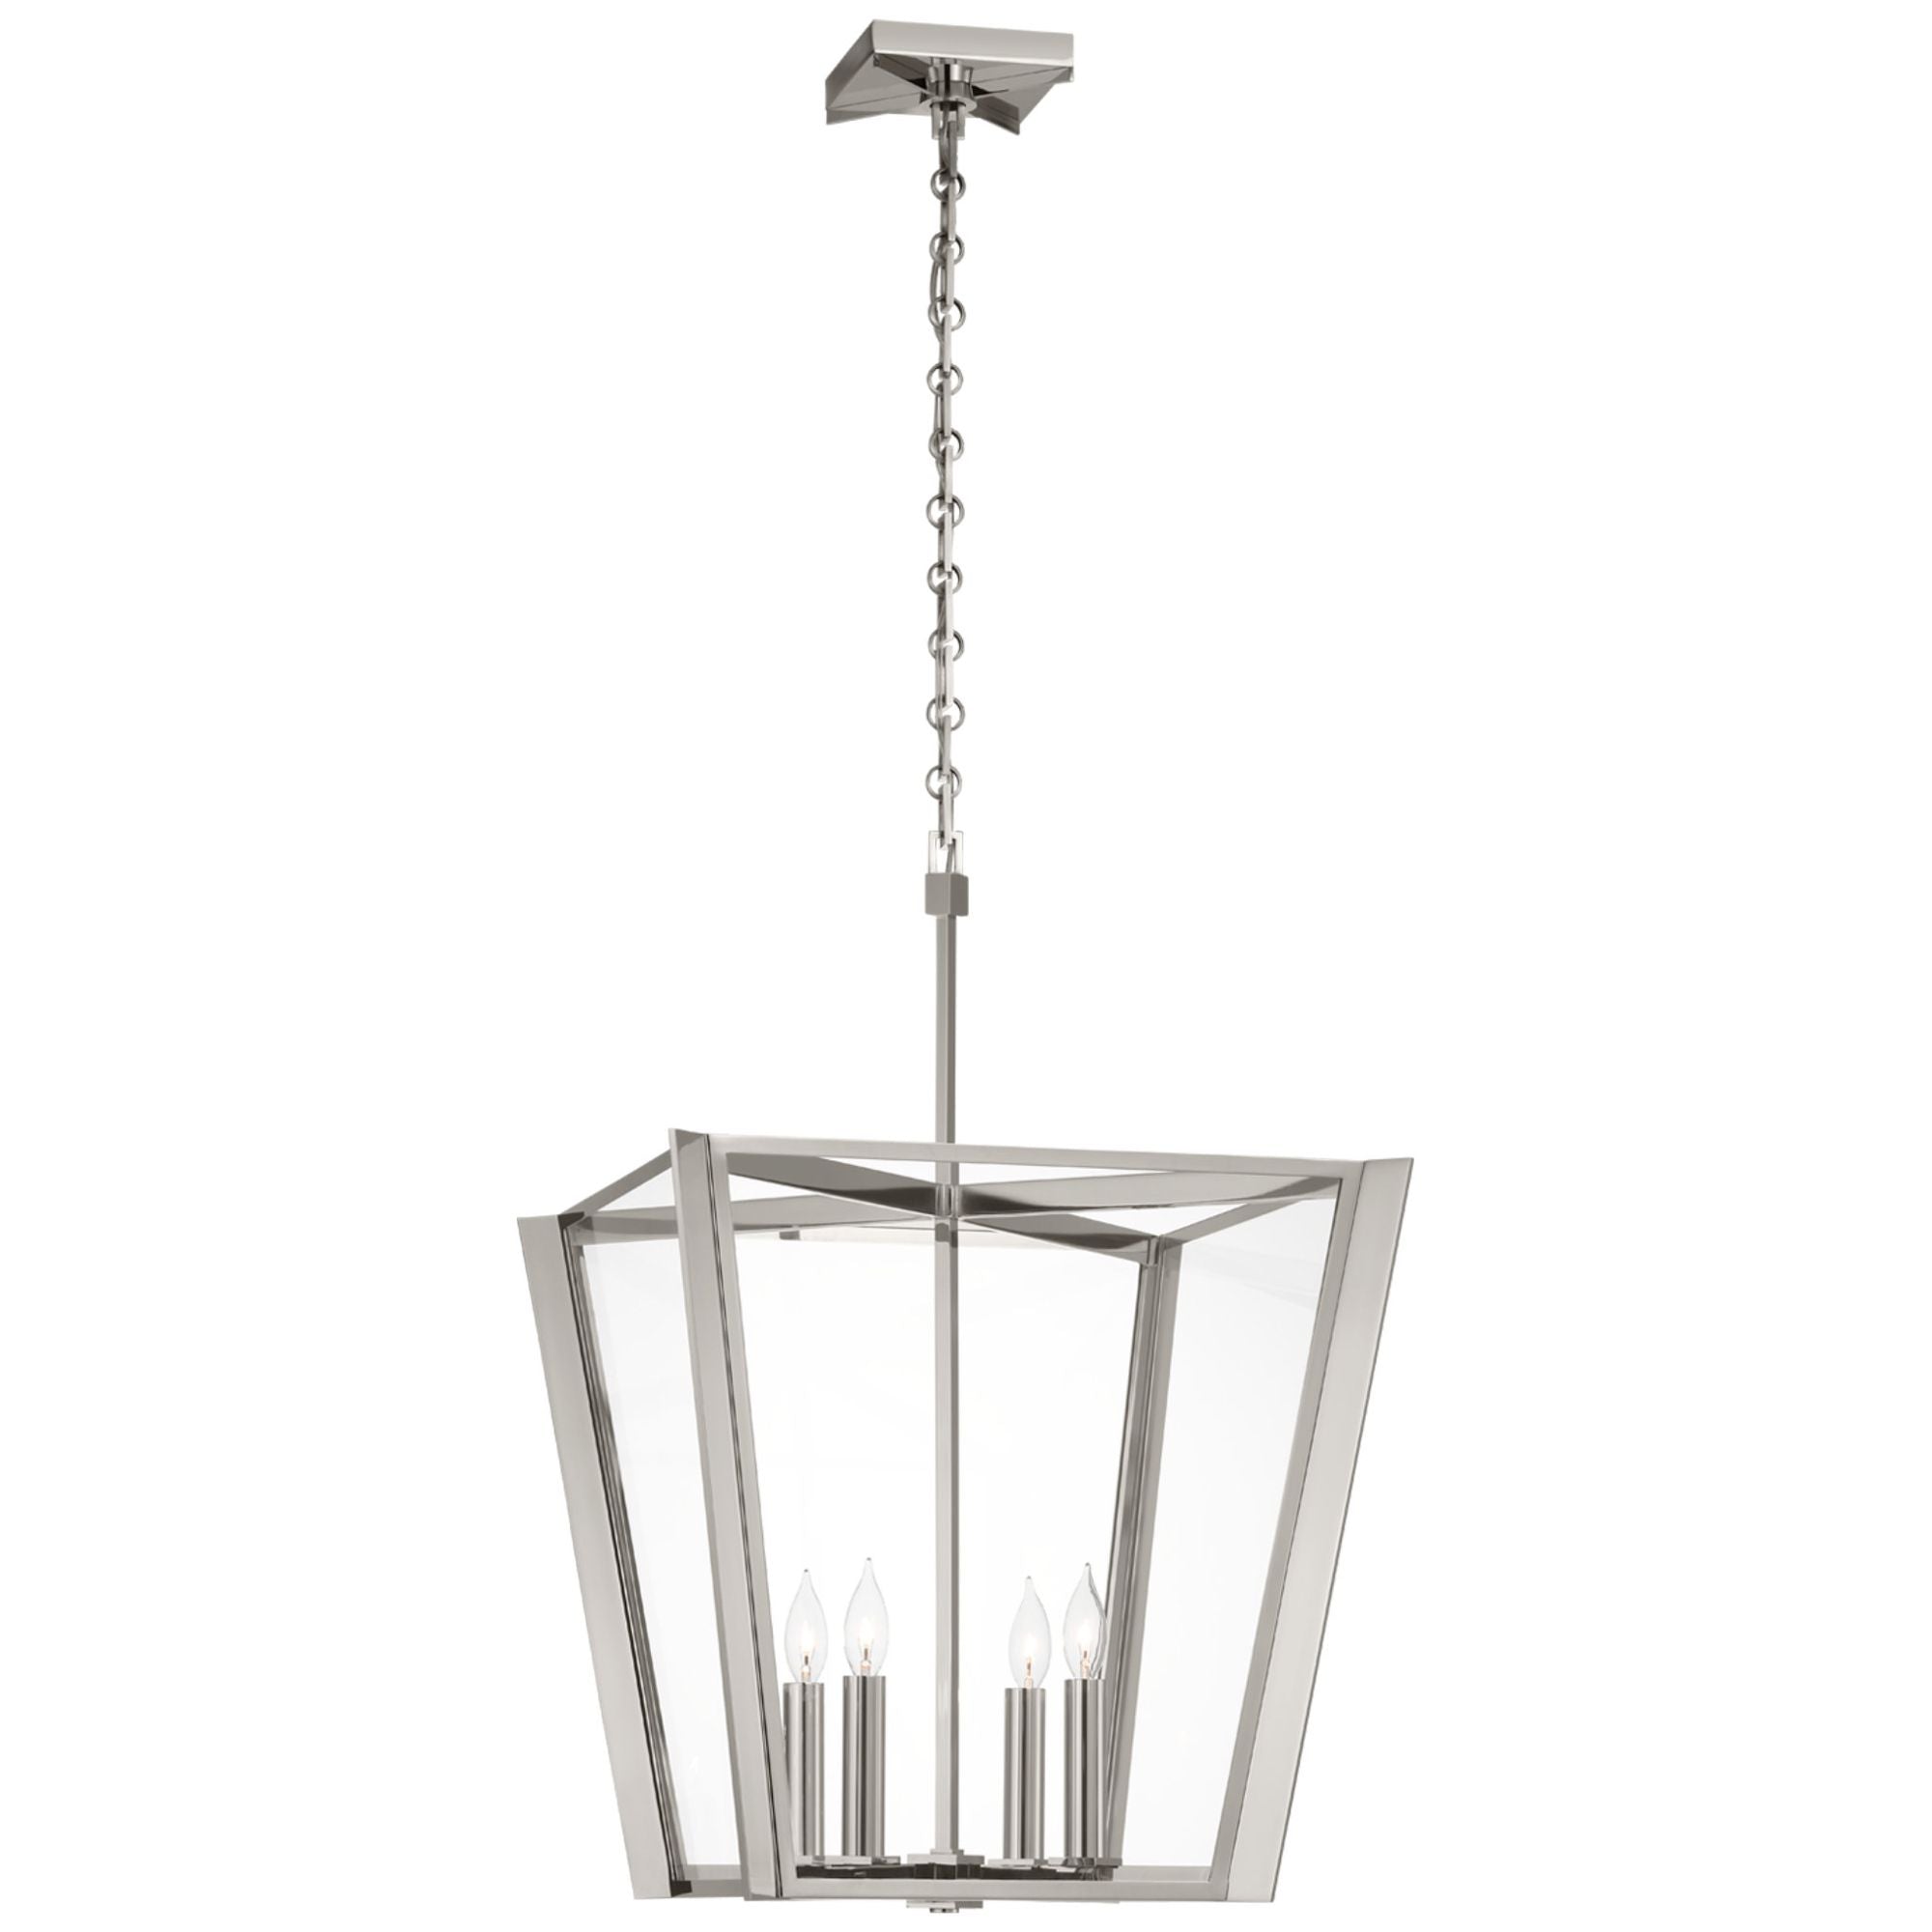 Paloma Contreras Palais 20" Lantern in Polished Nickel with Clear Glass